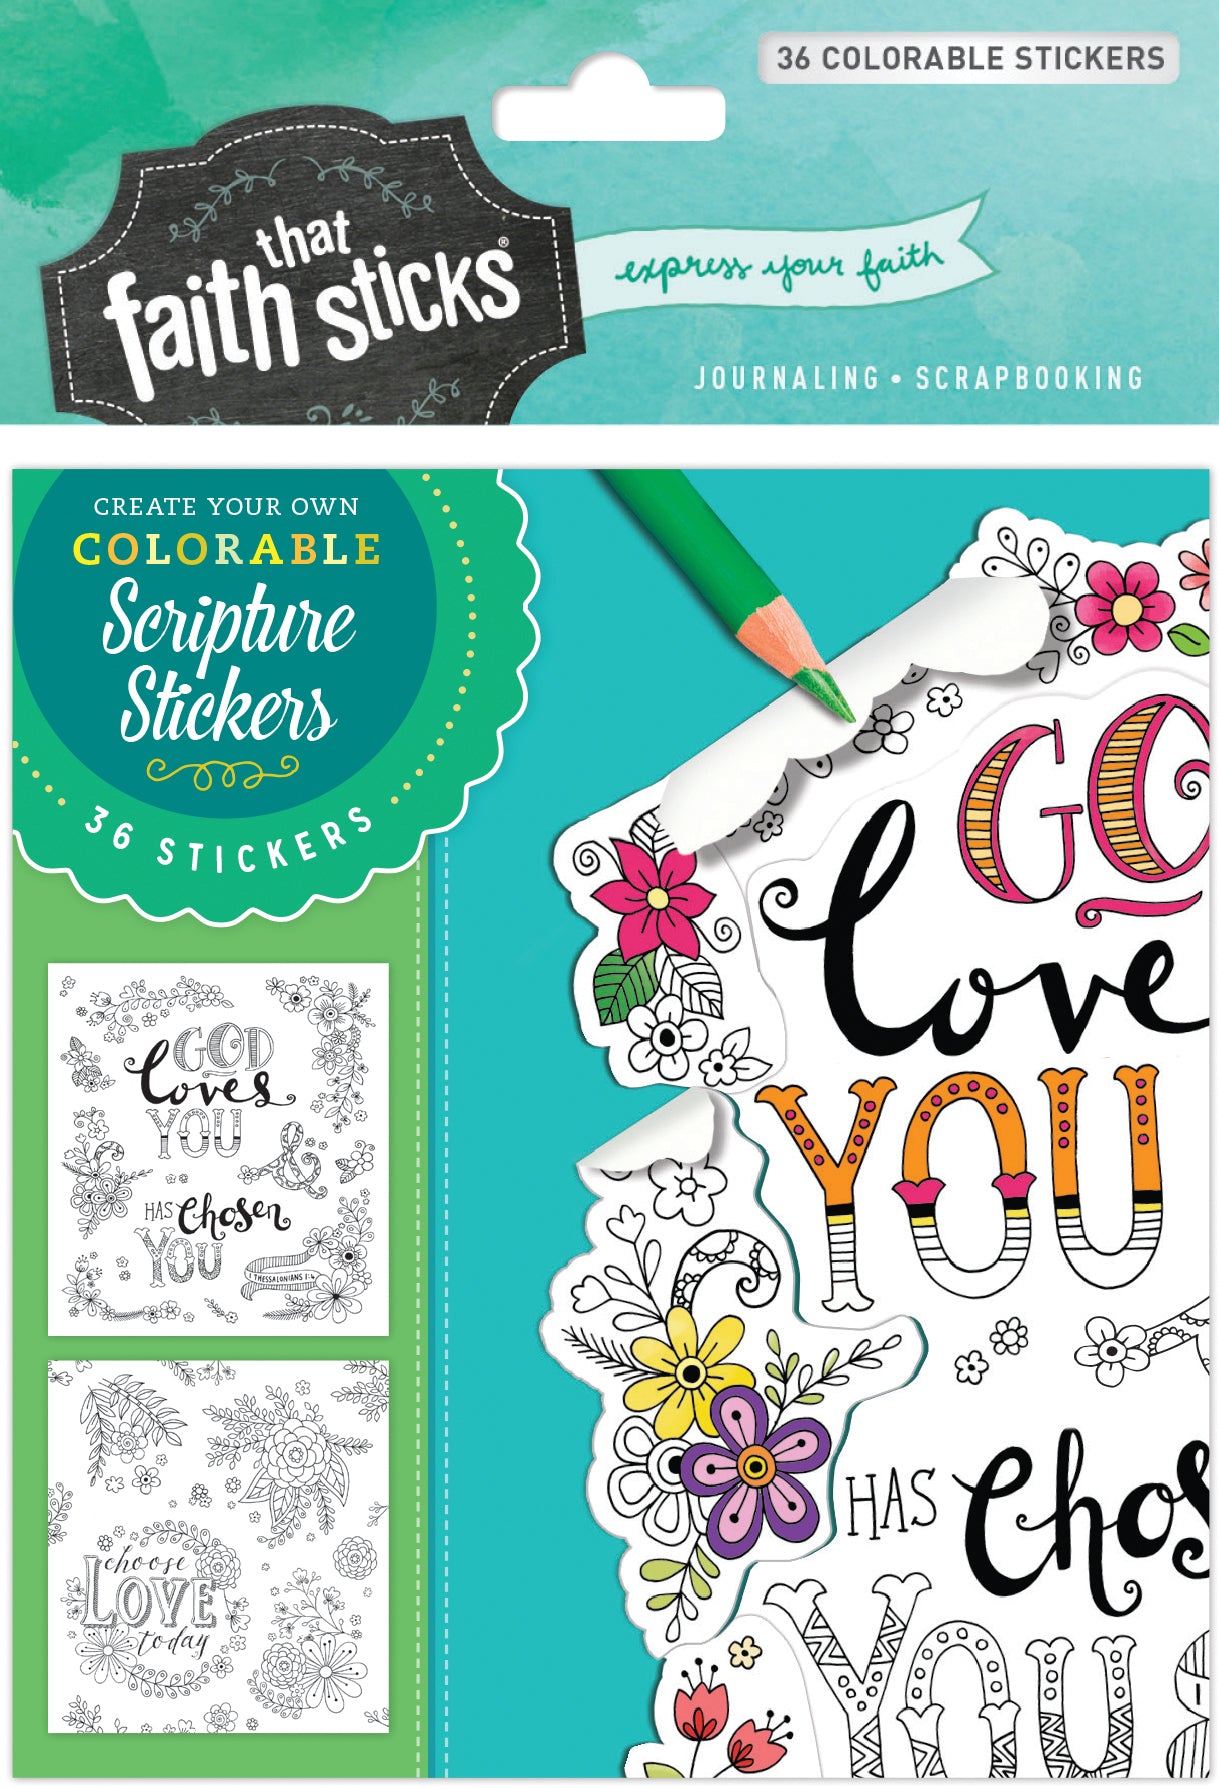 Image of 1 Thessalonians 1:4 Colorable Stickers other